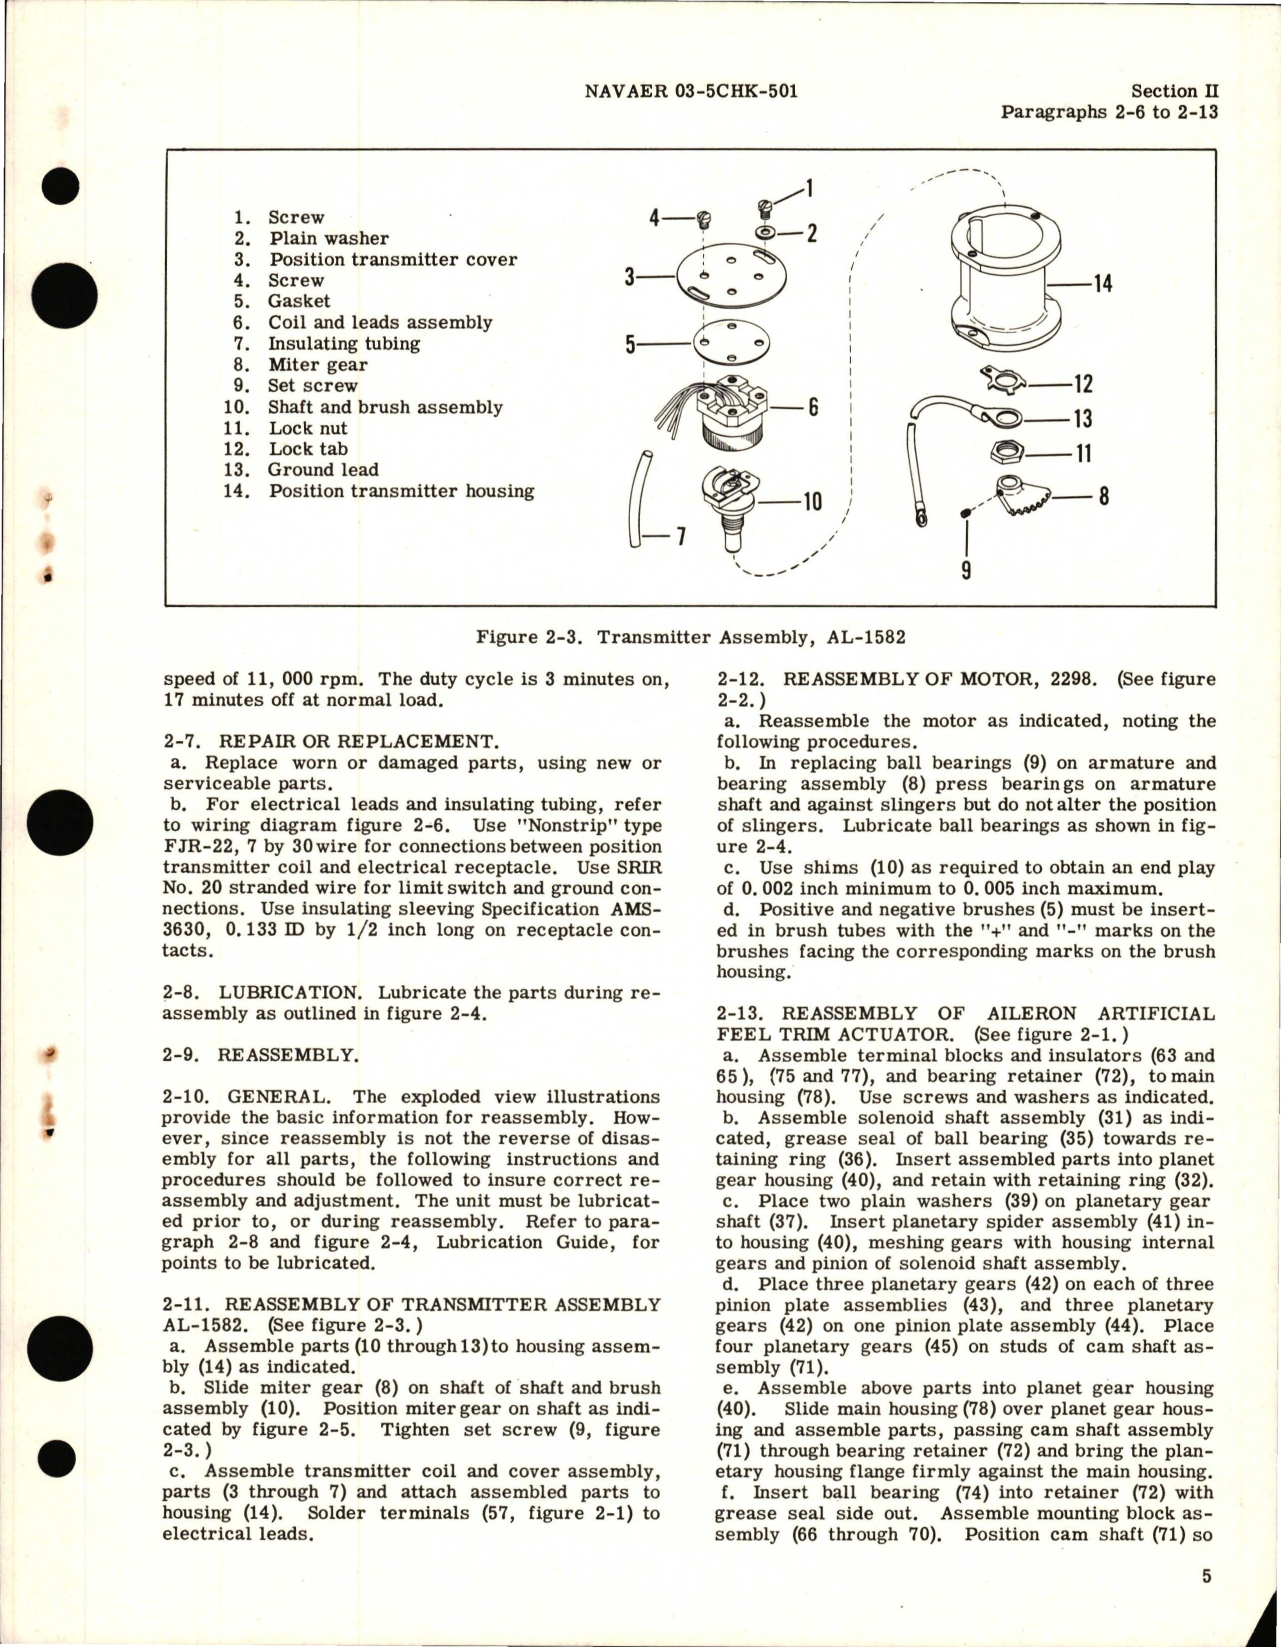 Sample page 7 from AirCorps Library document: Overhaul Instructions for Actuator Assembly, Aileron Artificial Feel Trim Part Numbers AL-1910 and AL-1423-1